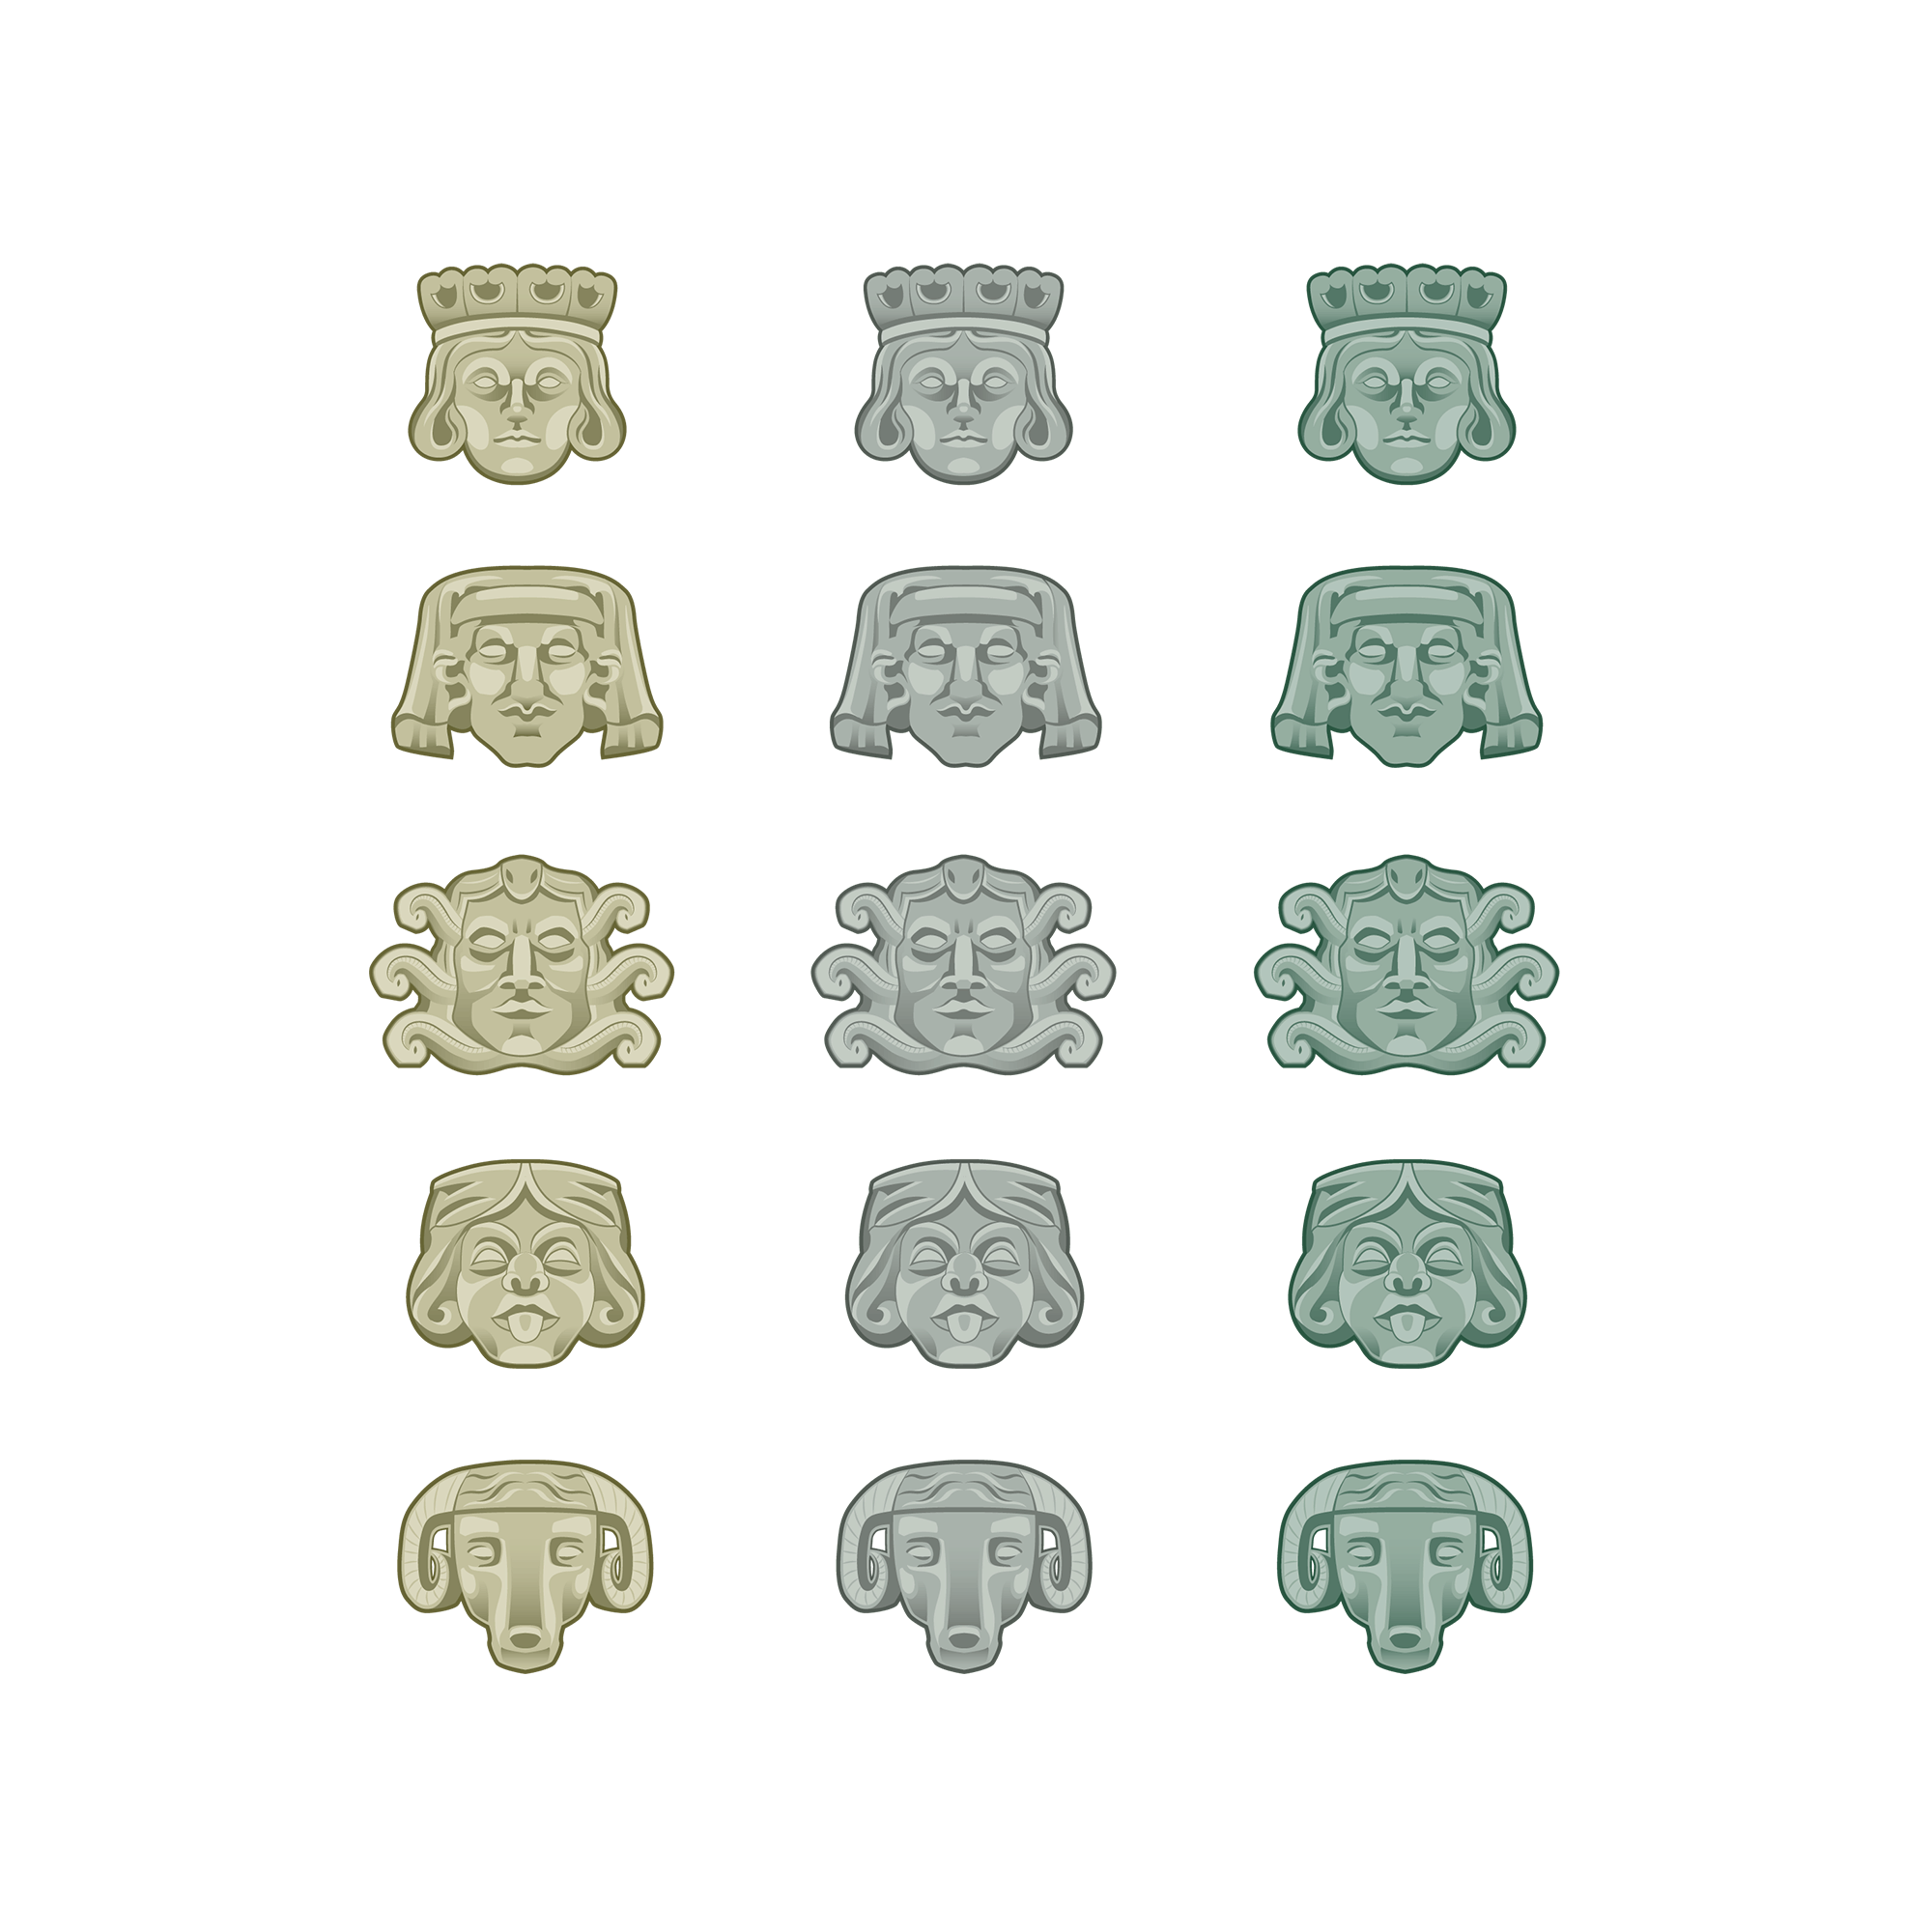 tan, gray, and green illustrations of the grotesque faces at grove arcade